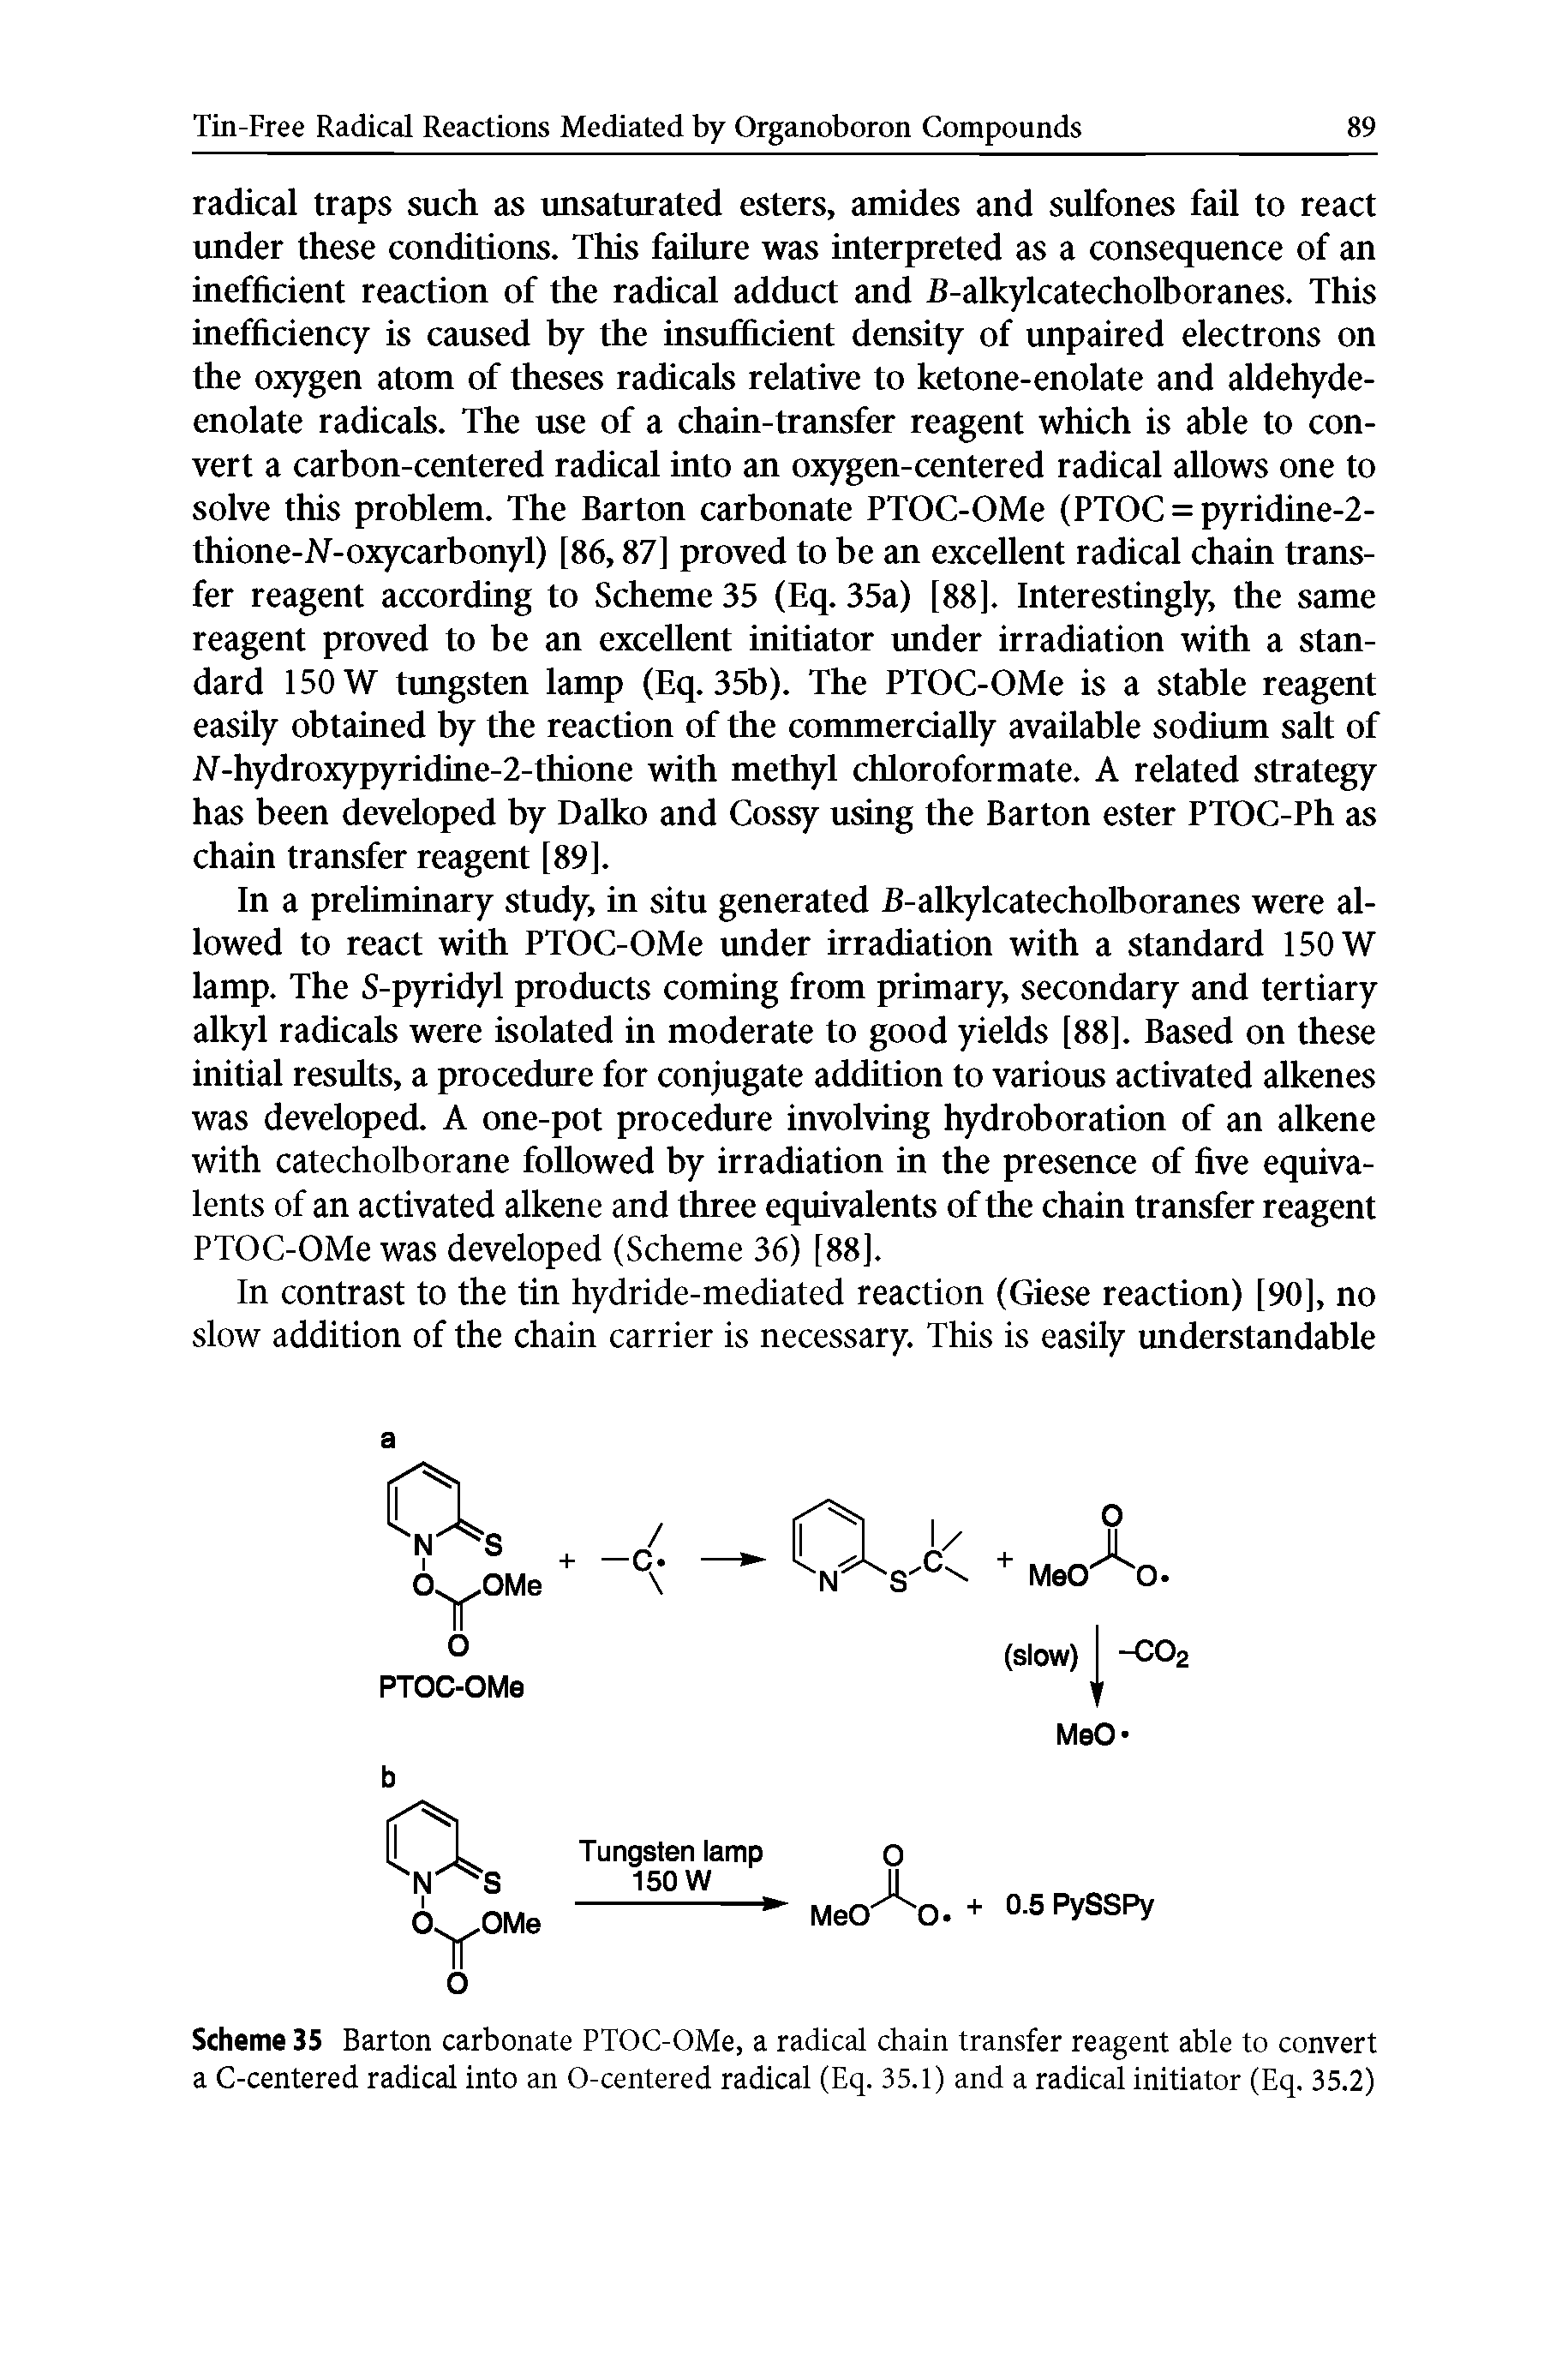 Scheme 35 Barton carbonate PTOC-OMe, a radical chain transfer reagent able to convert a C-centered radical into an O-centered radical (Eq. 35.1) and a radical initiator (Eq. 35.2)...